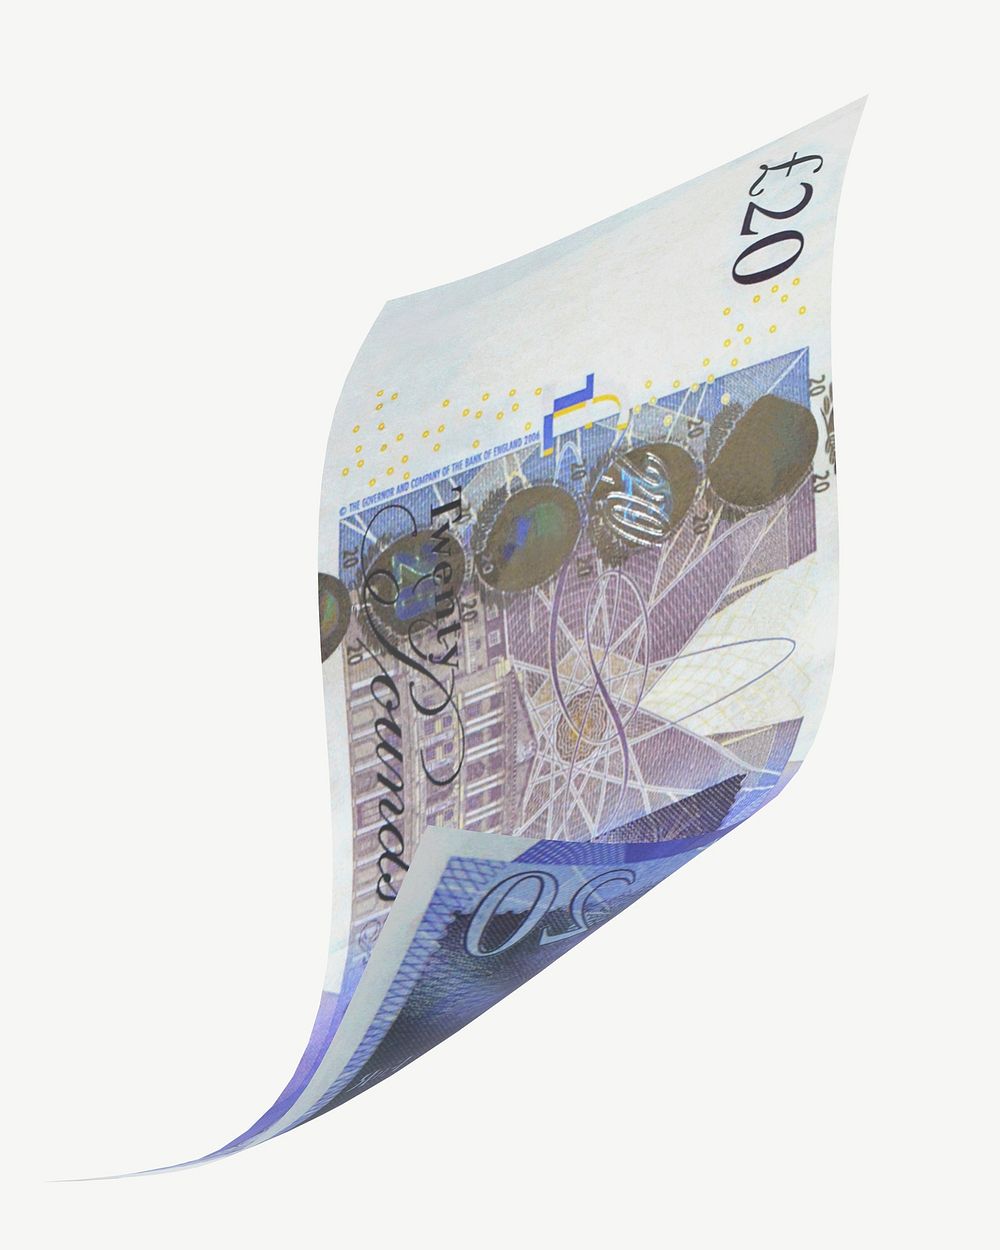 20 British pounds bank note, collage element psd